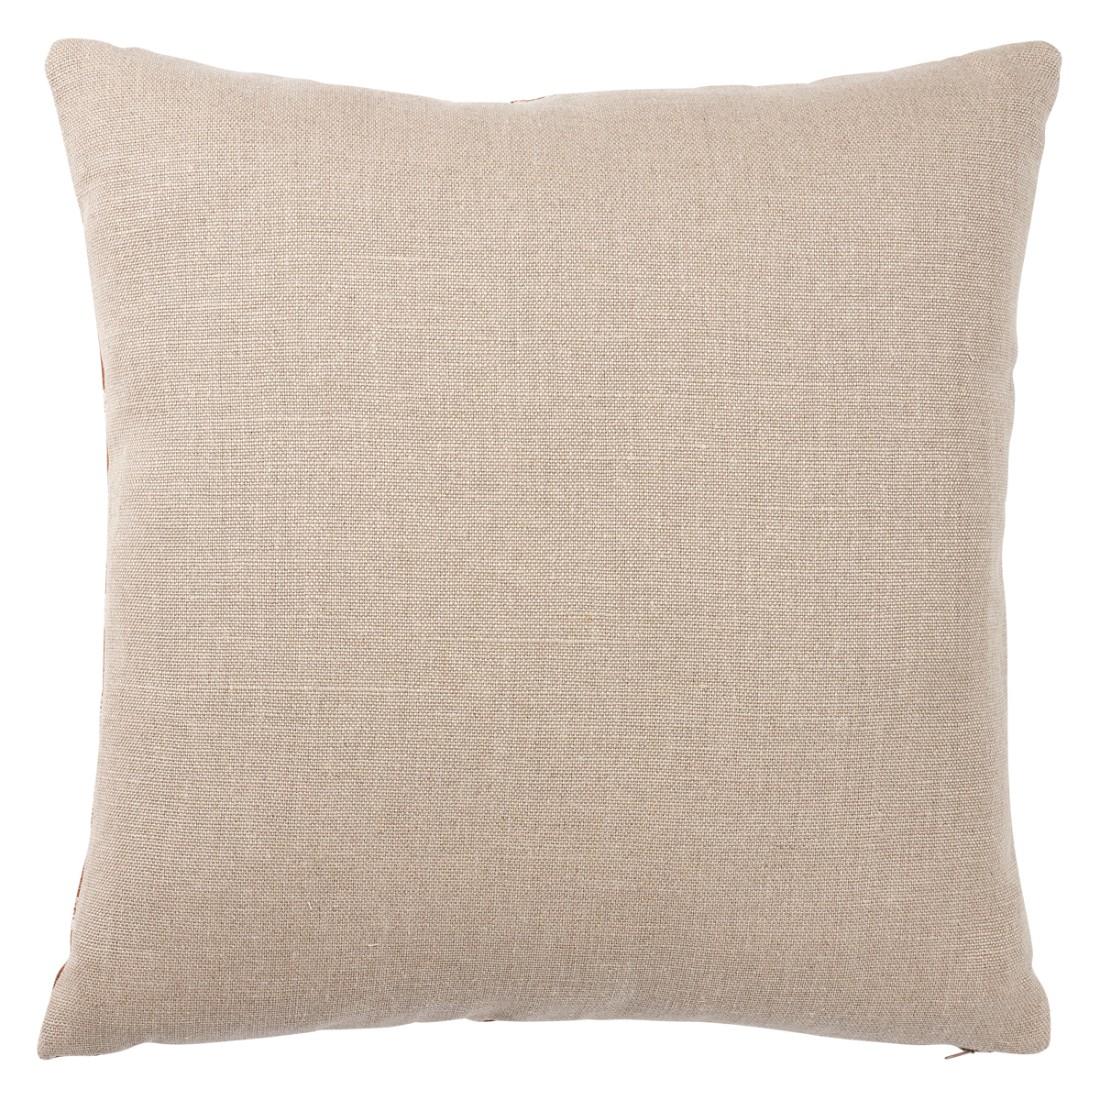 This pillow features Wentworth Embroidery with a Knife Edge finish. The embroidery has an elegant cross-stitching on jute and linen with subtle tonal variations that lend a wonderful handmade allure. Back of pillow is Piet Performance Linen. Pillow